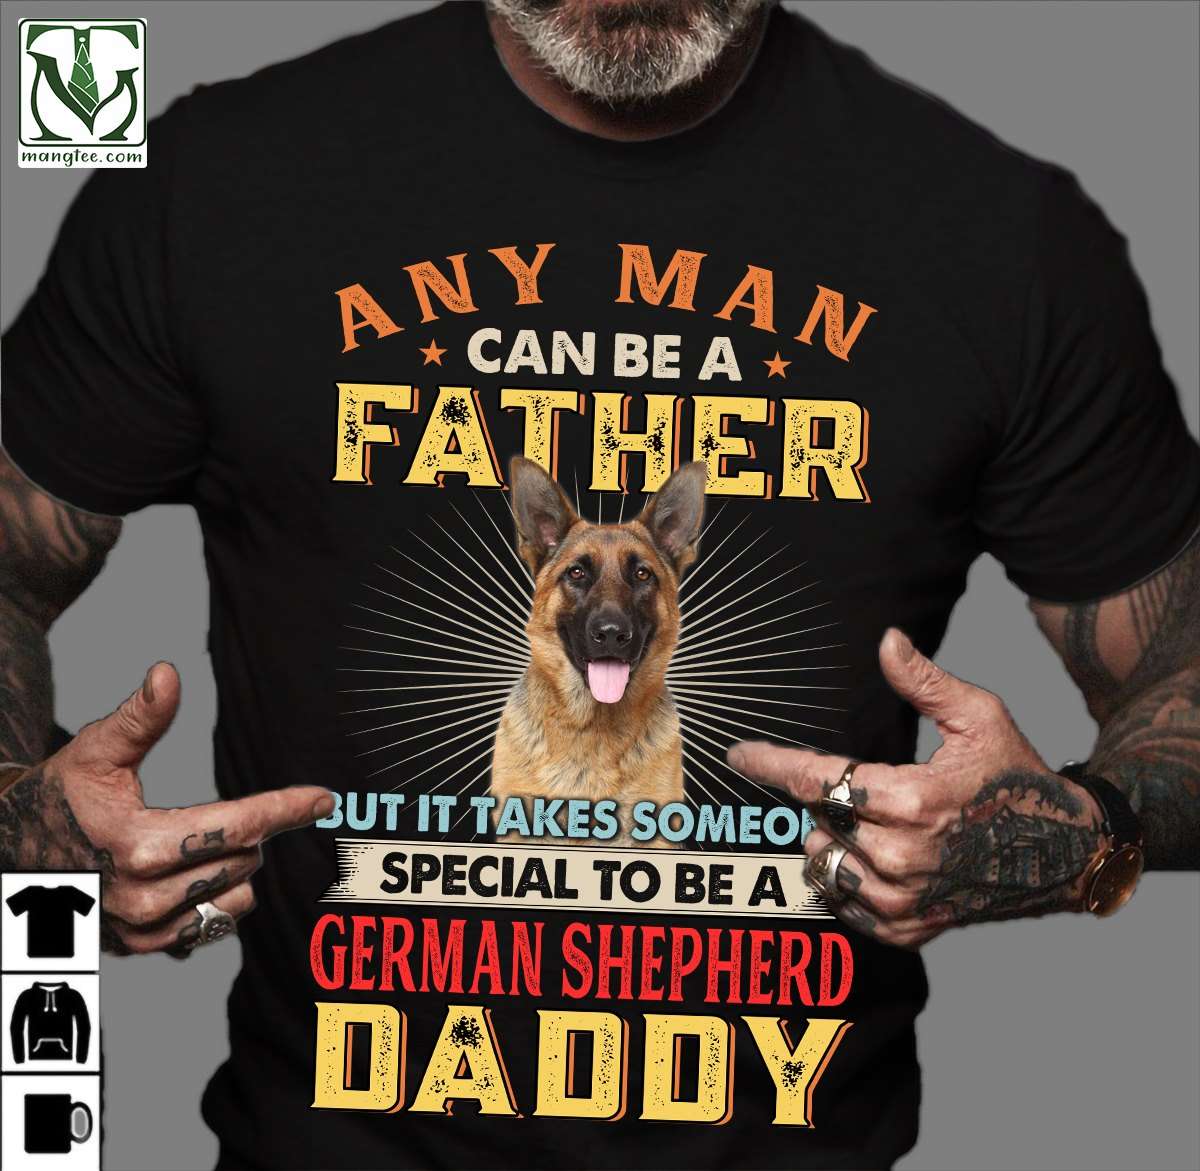 German Shepherd Dog - Any man can be a father but it takes someone special to be a german shepherd daddy